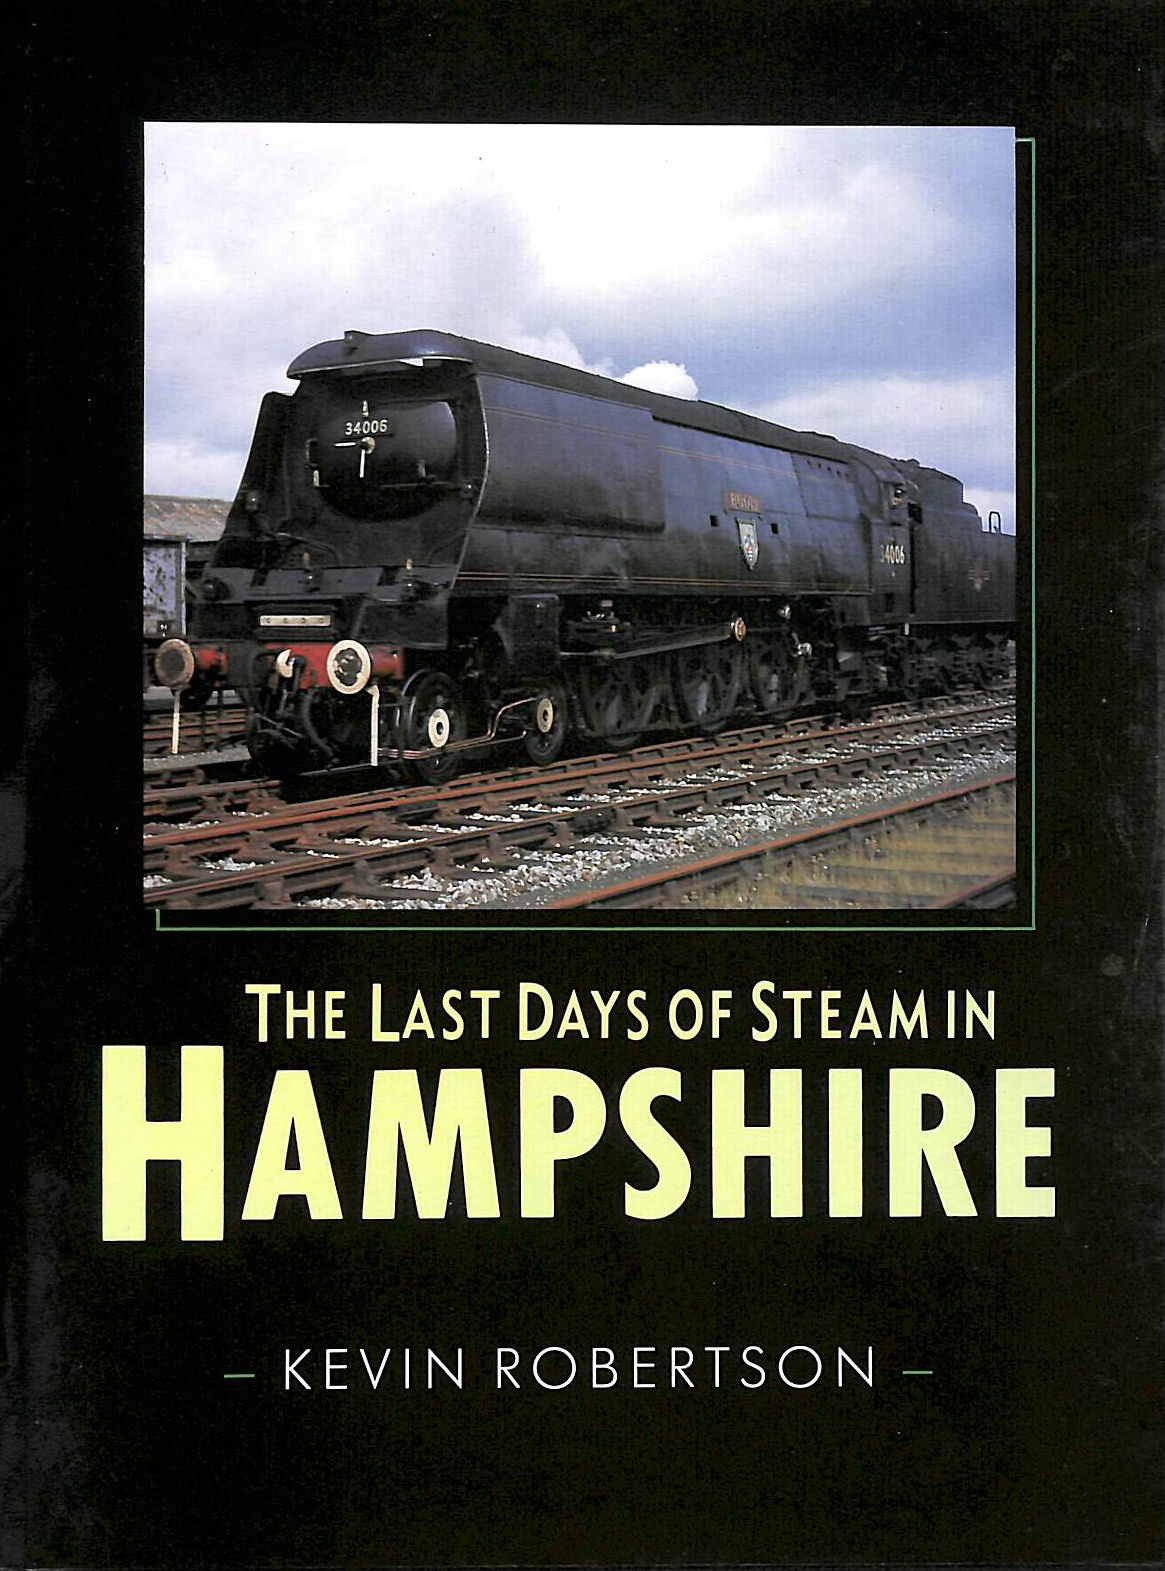 ROBERTSON, KEVIN - The Last Days of Steam in Hampshire